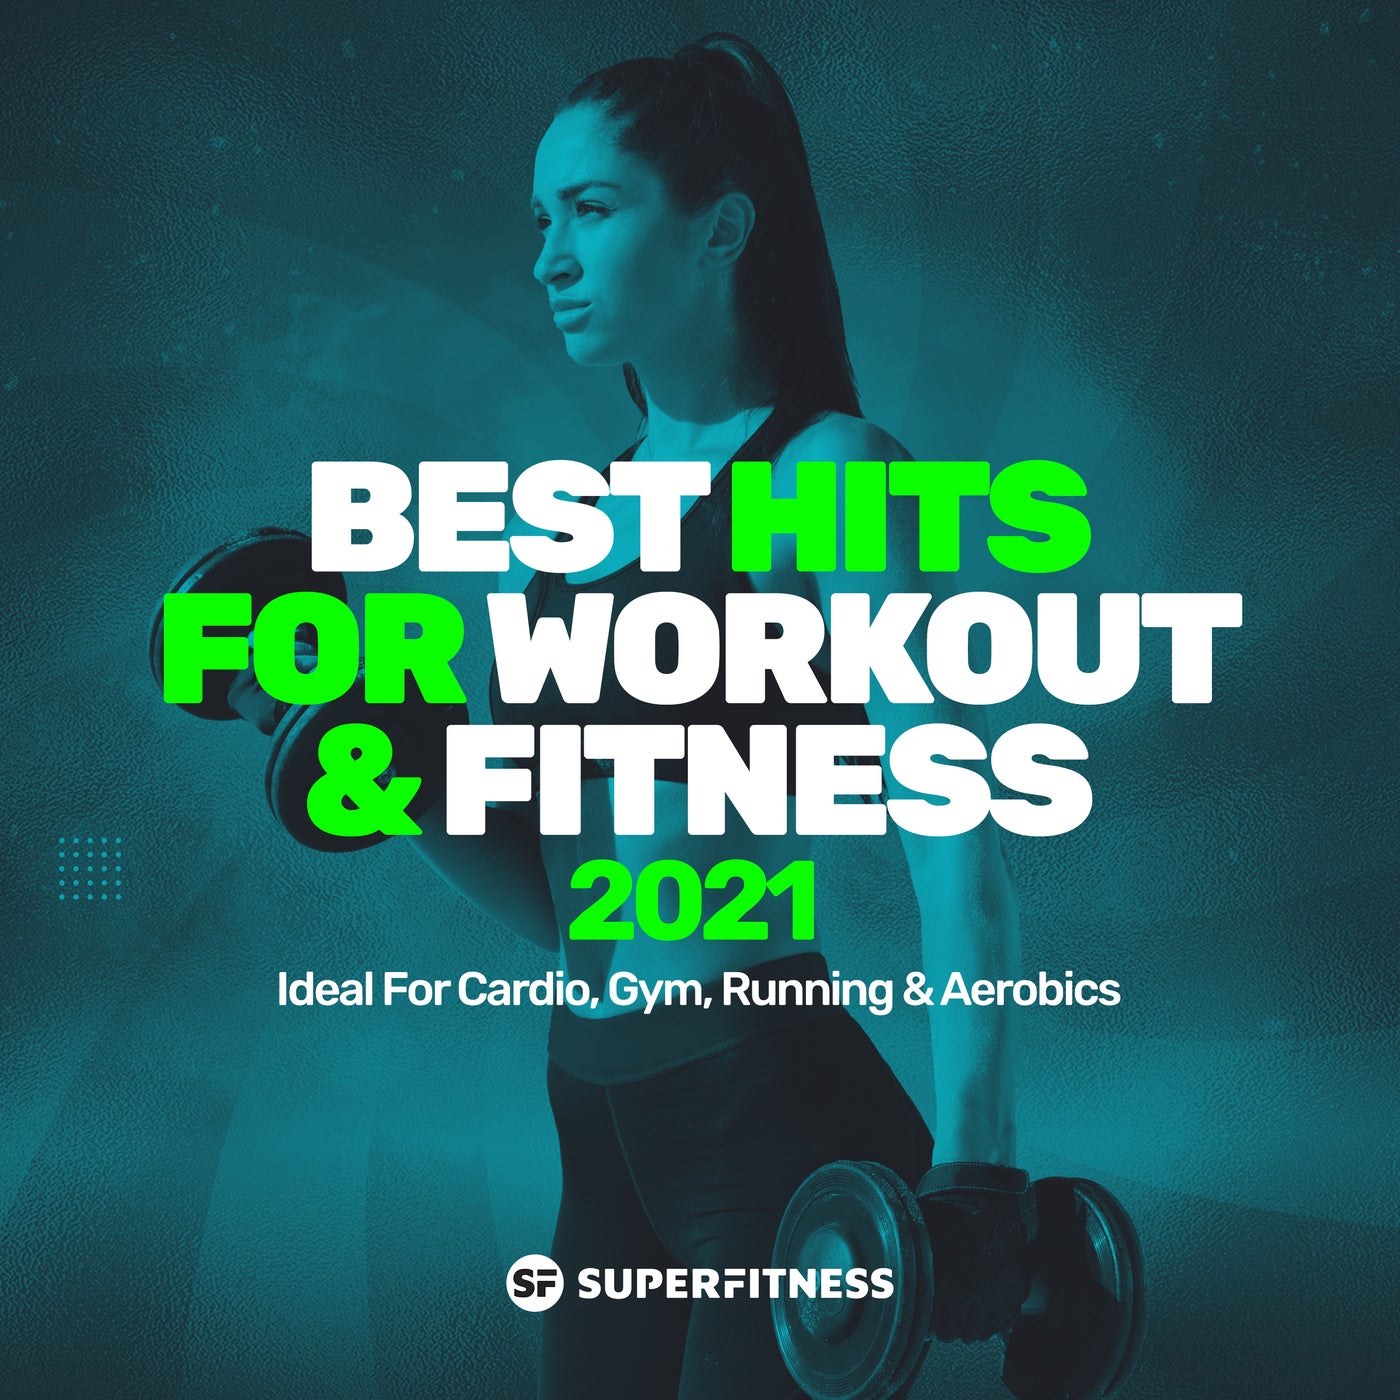 Best Hits For Workout & Fitness 2021 (Ideal For Cardio, Gym, Running & Aerobics)